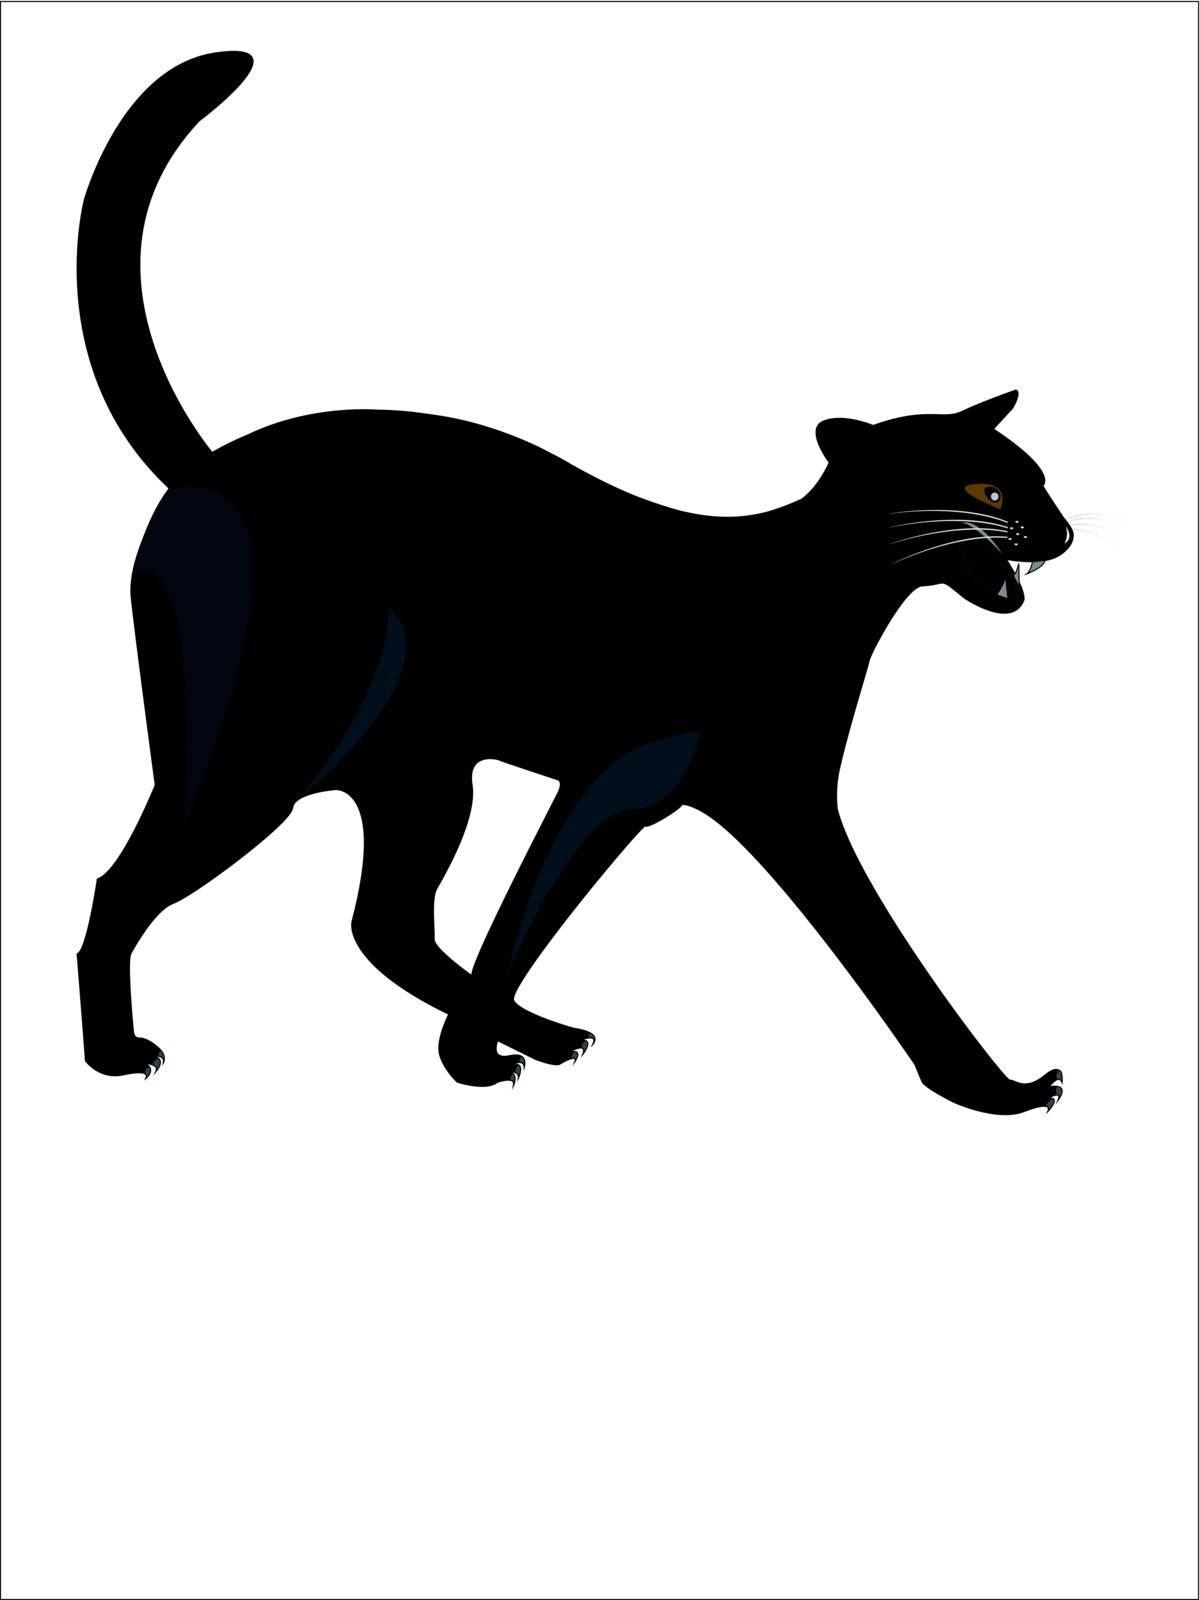 Black cat standing on the white background